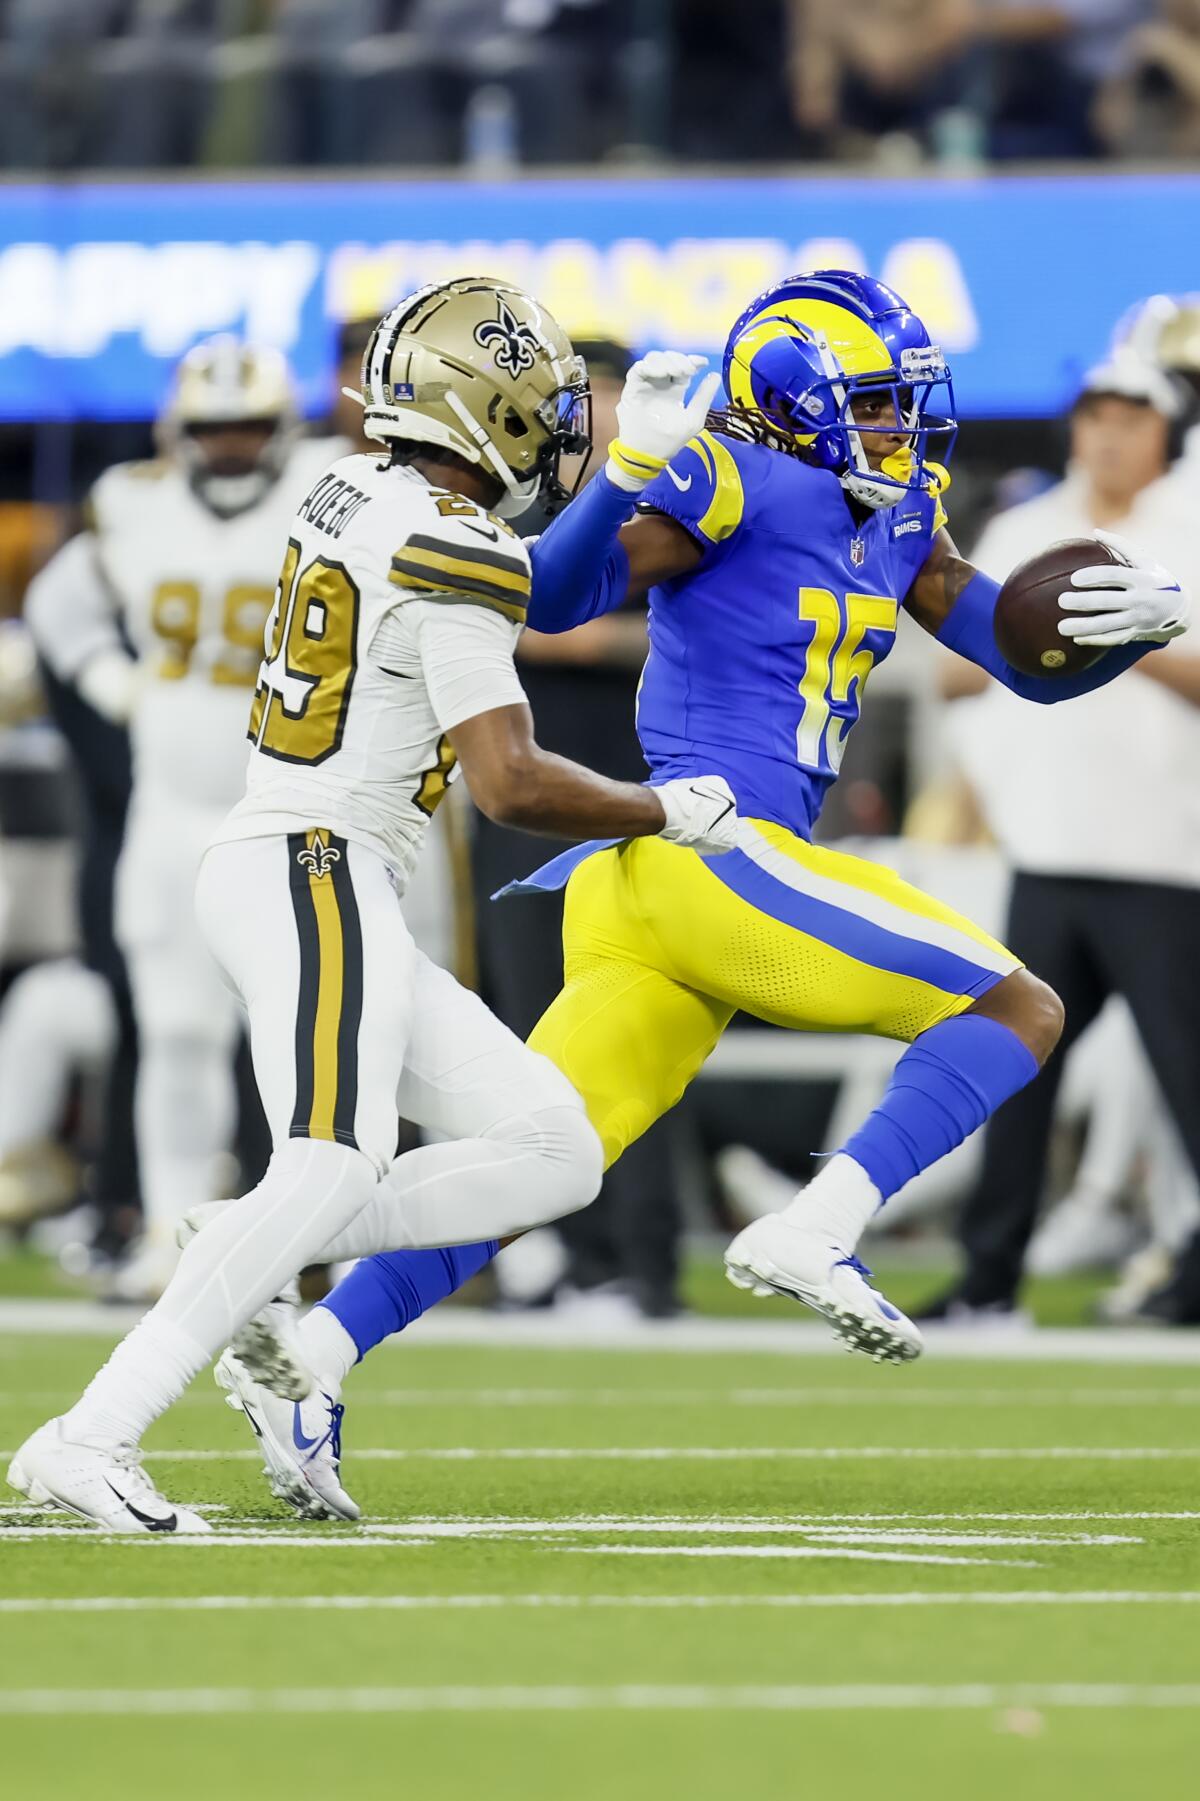 Rams receiver Demarcus Robinson runs for yardage after a catch.